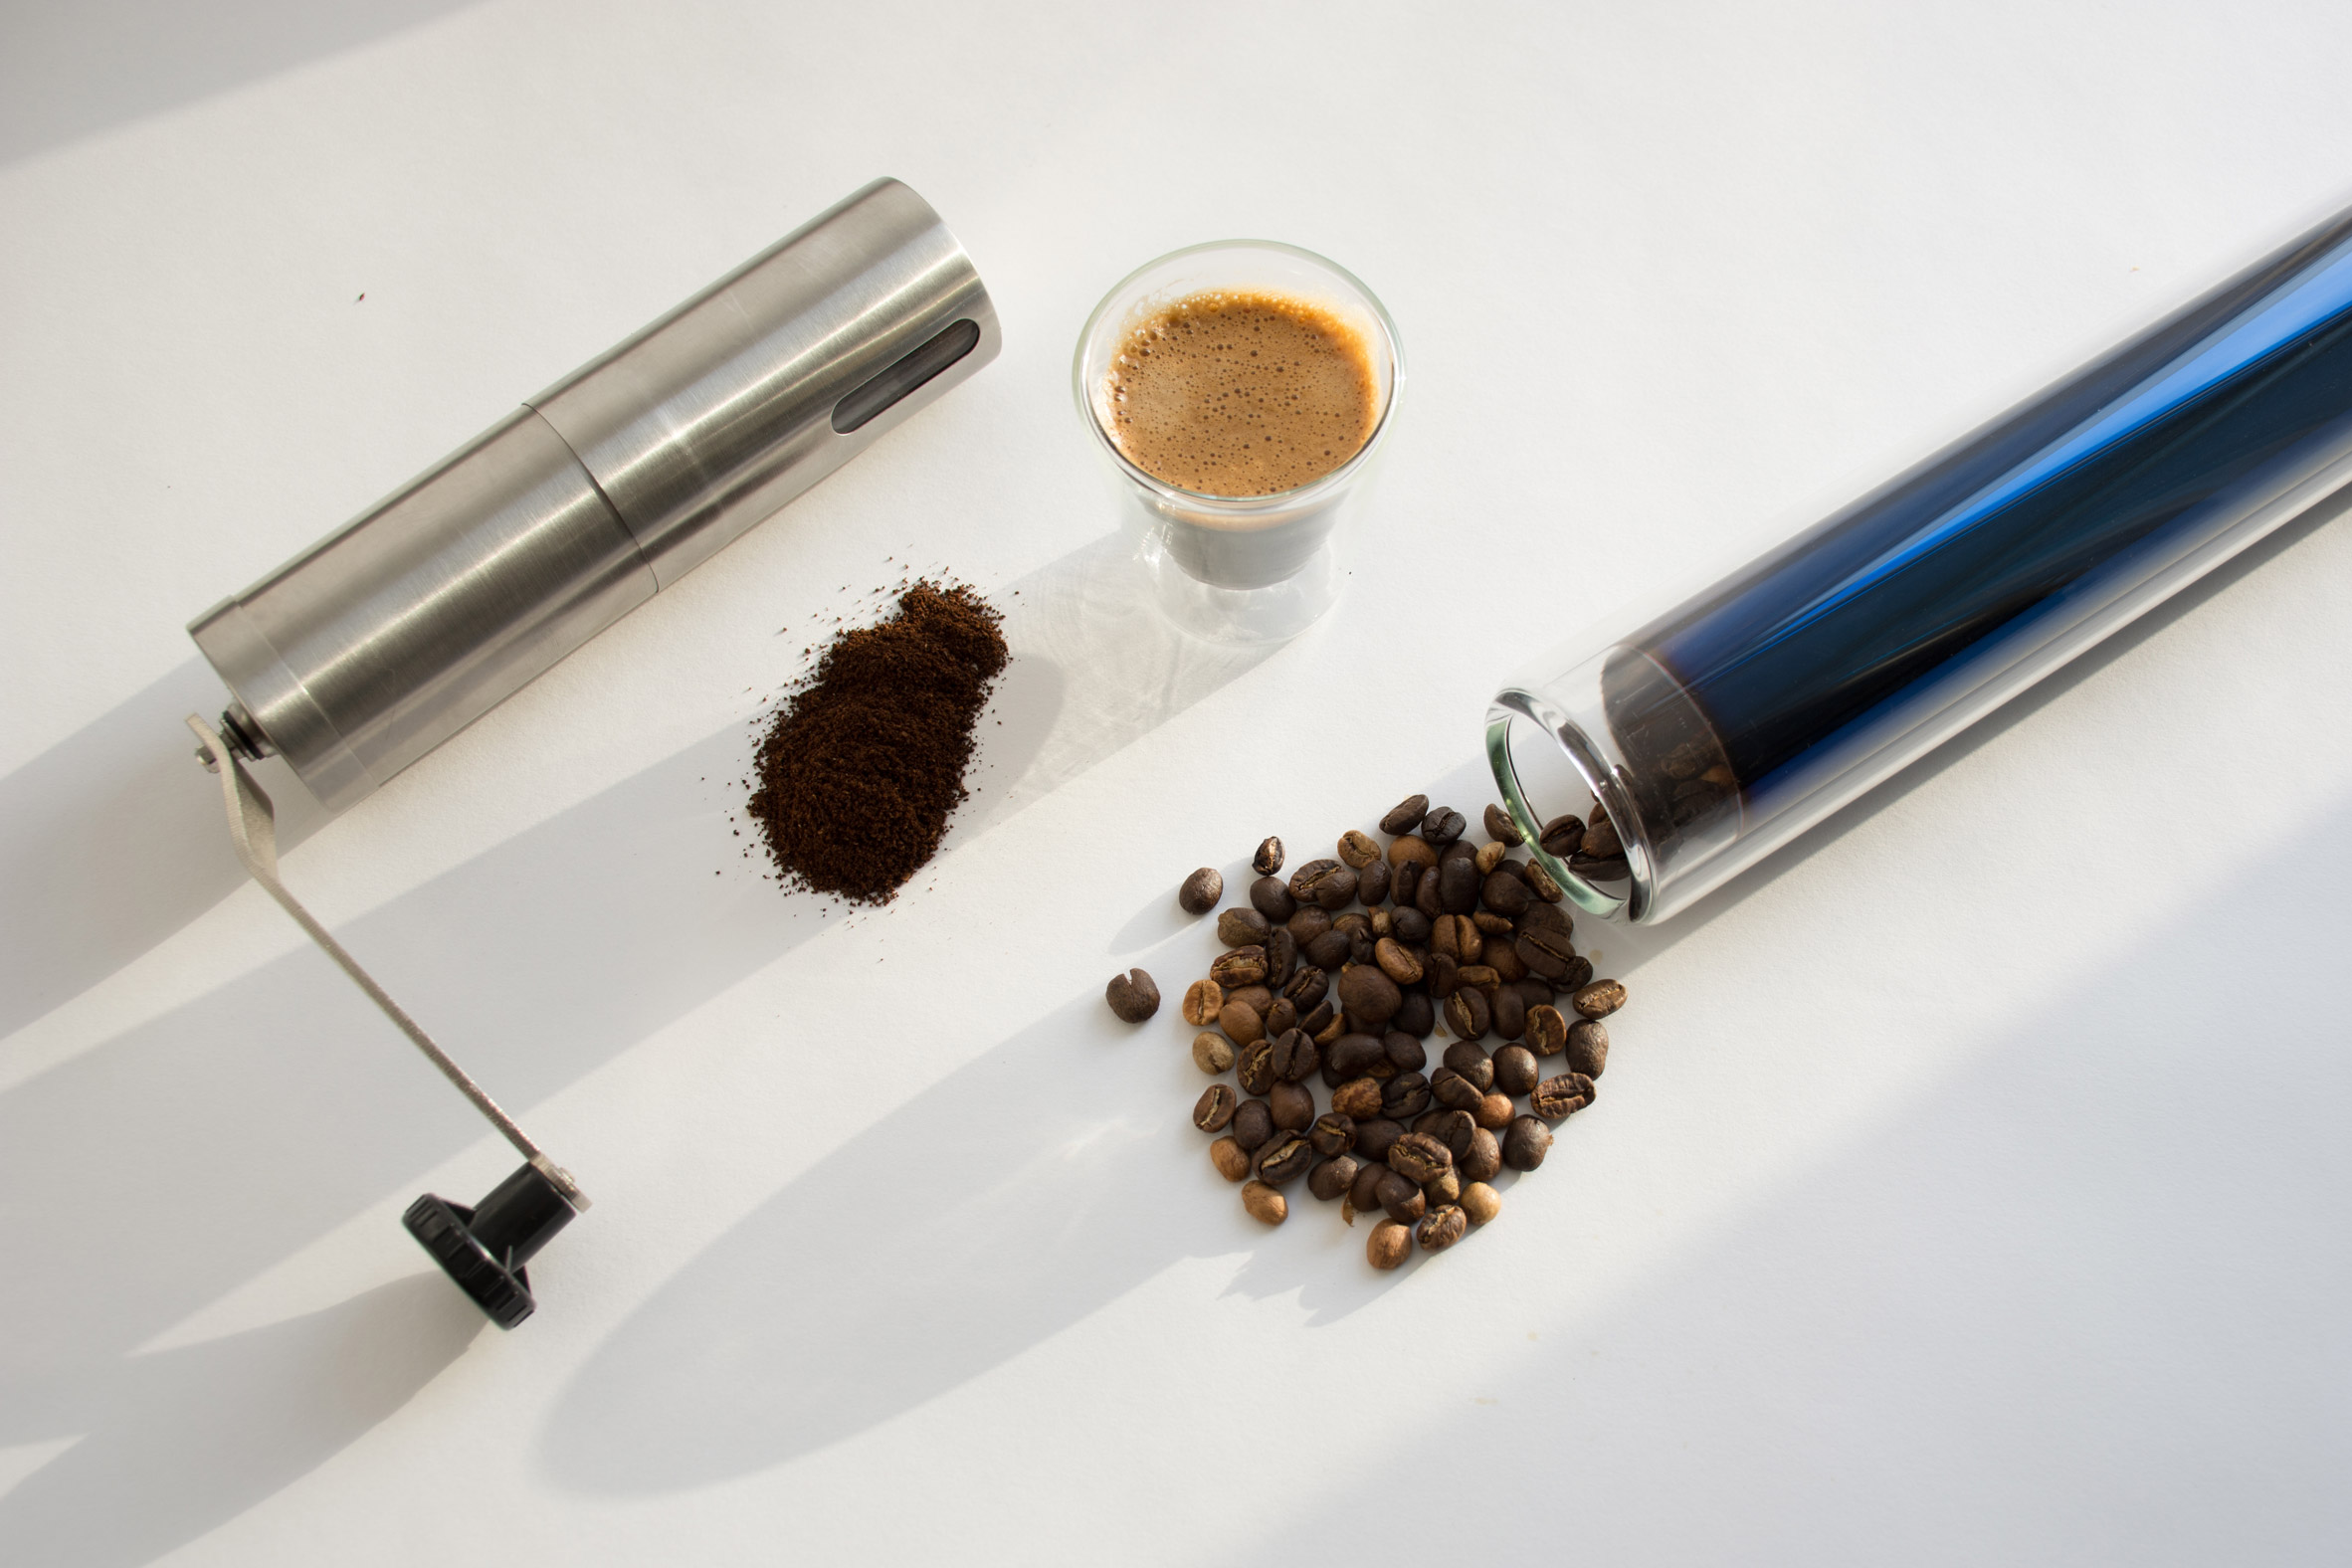 Coffee-Making Tools from Solar-Powered Glass Tubes